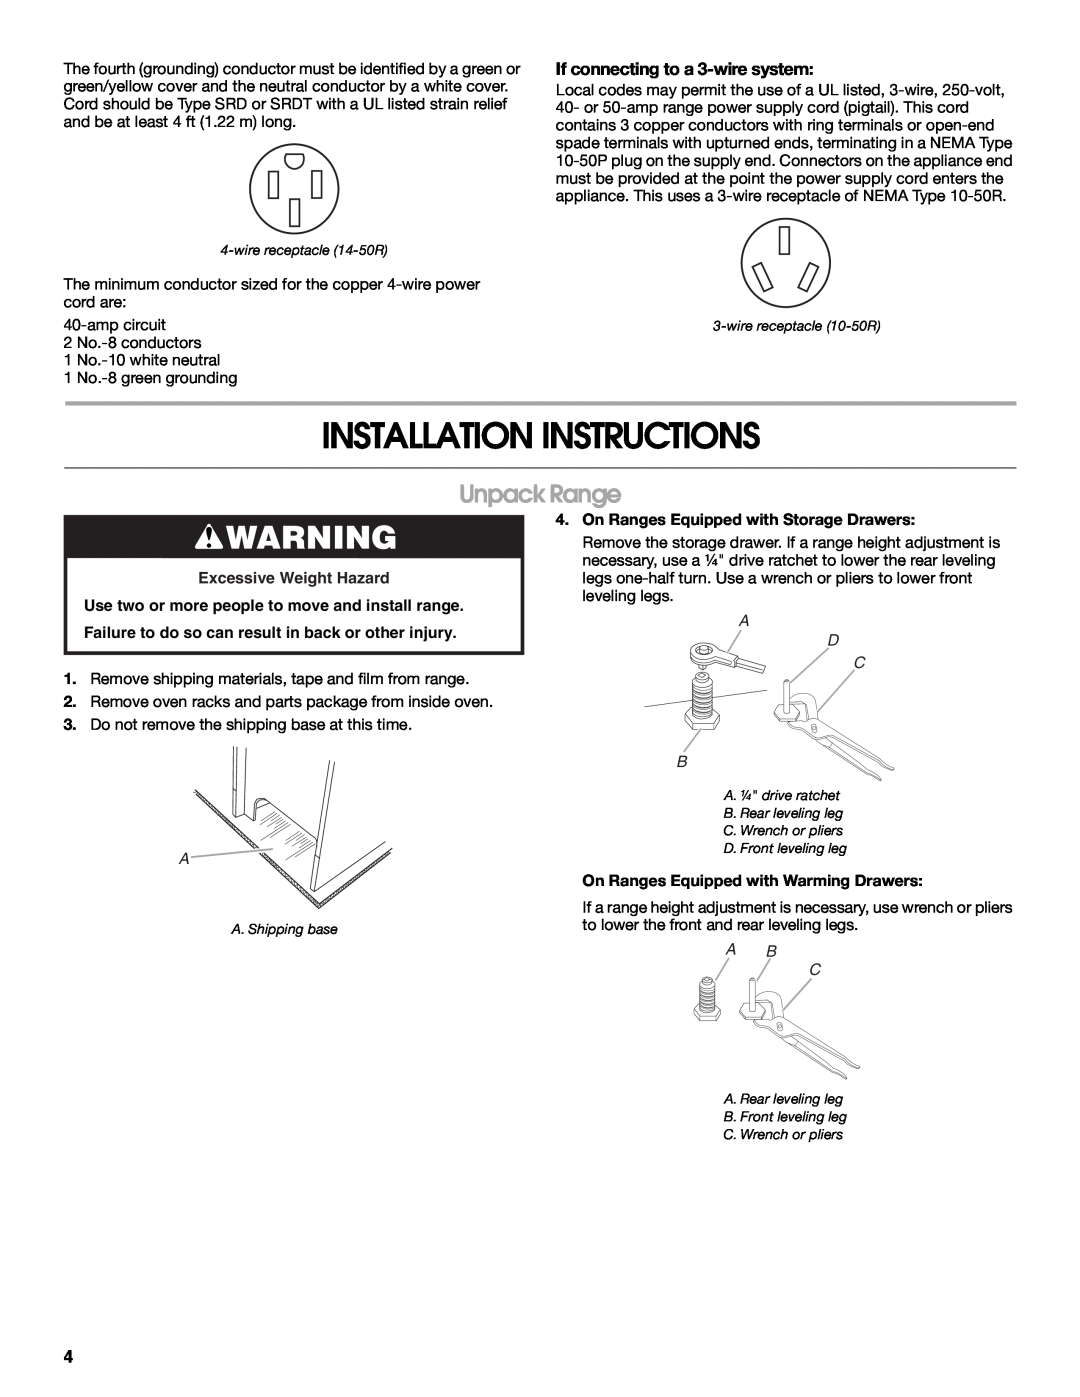 Whirlpool W10258095A Installation Instructions, Unpack Range, If connecting to a 3-wire system, Excessive Weight Hazard 